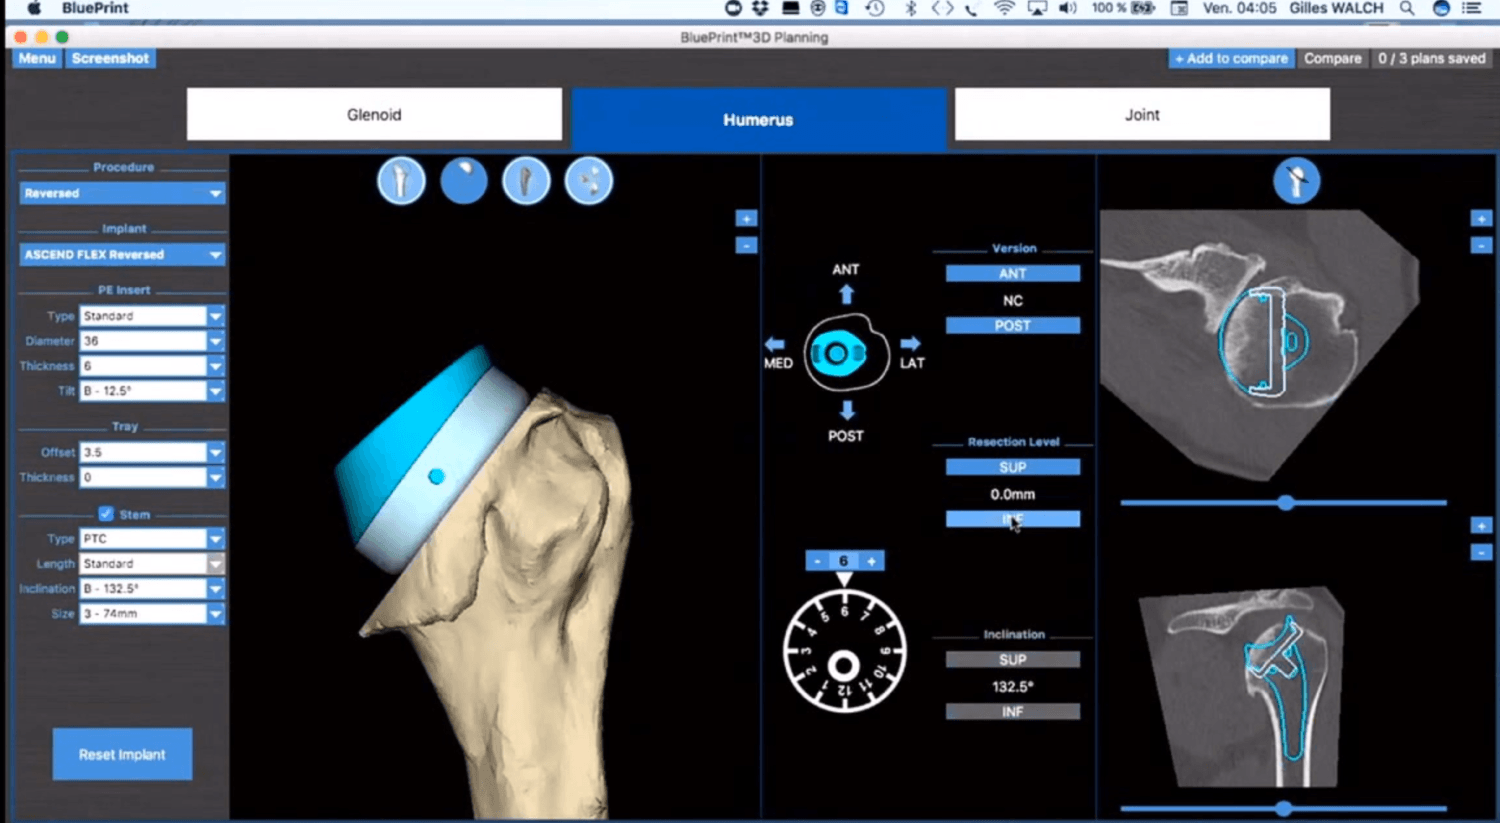 Mayo Clinic Performs First Shoulder Arthroplasty Procedure Using Mixed Reality